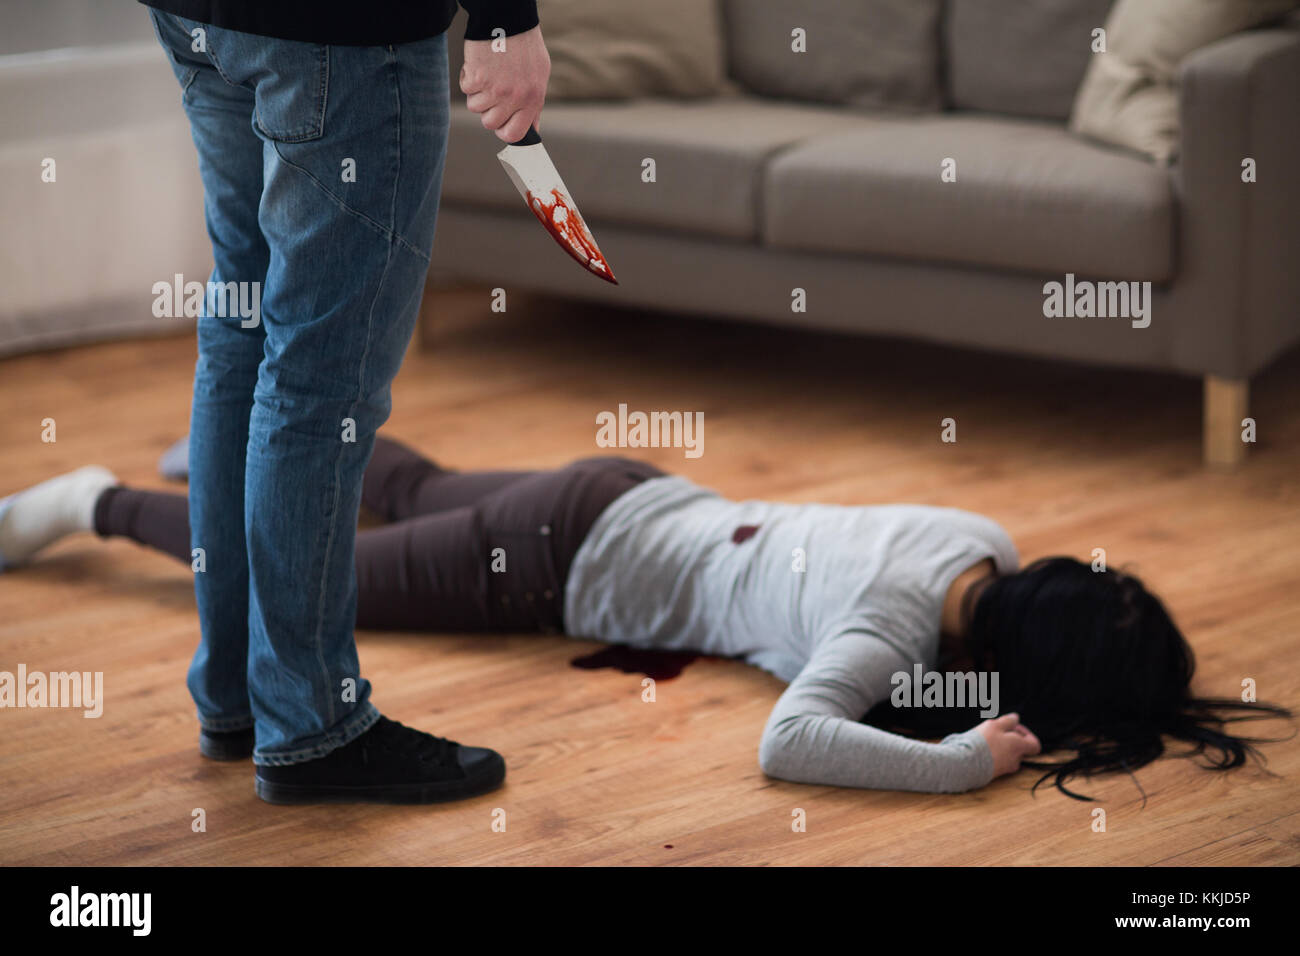 criminal with knife and dead body at crime scene Stock Photo